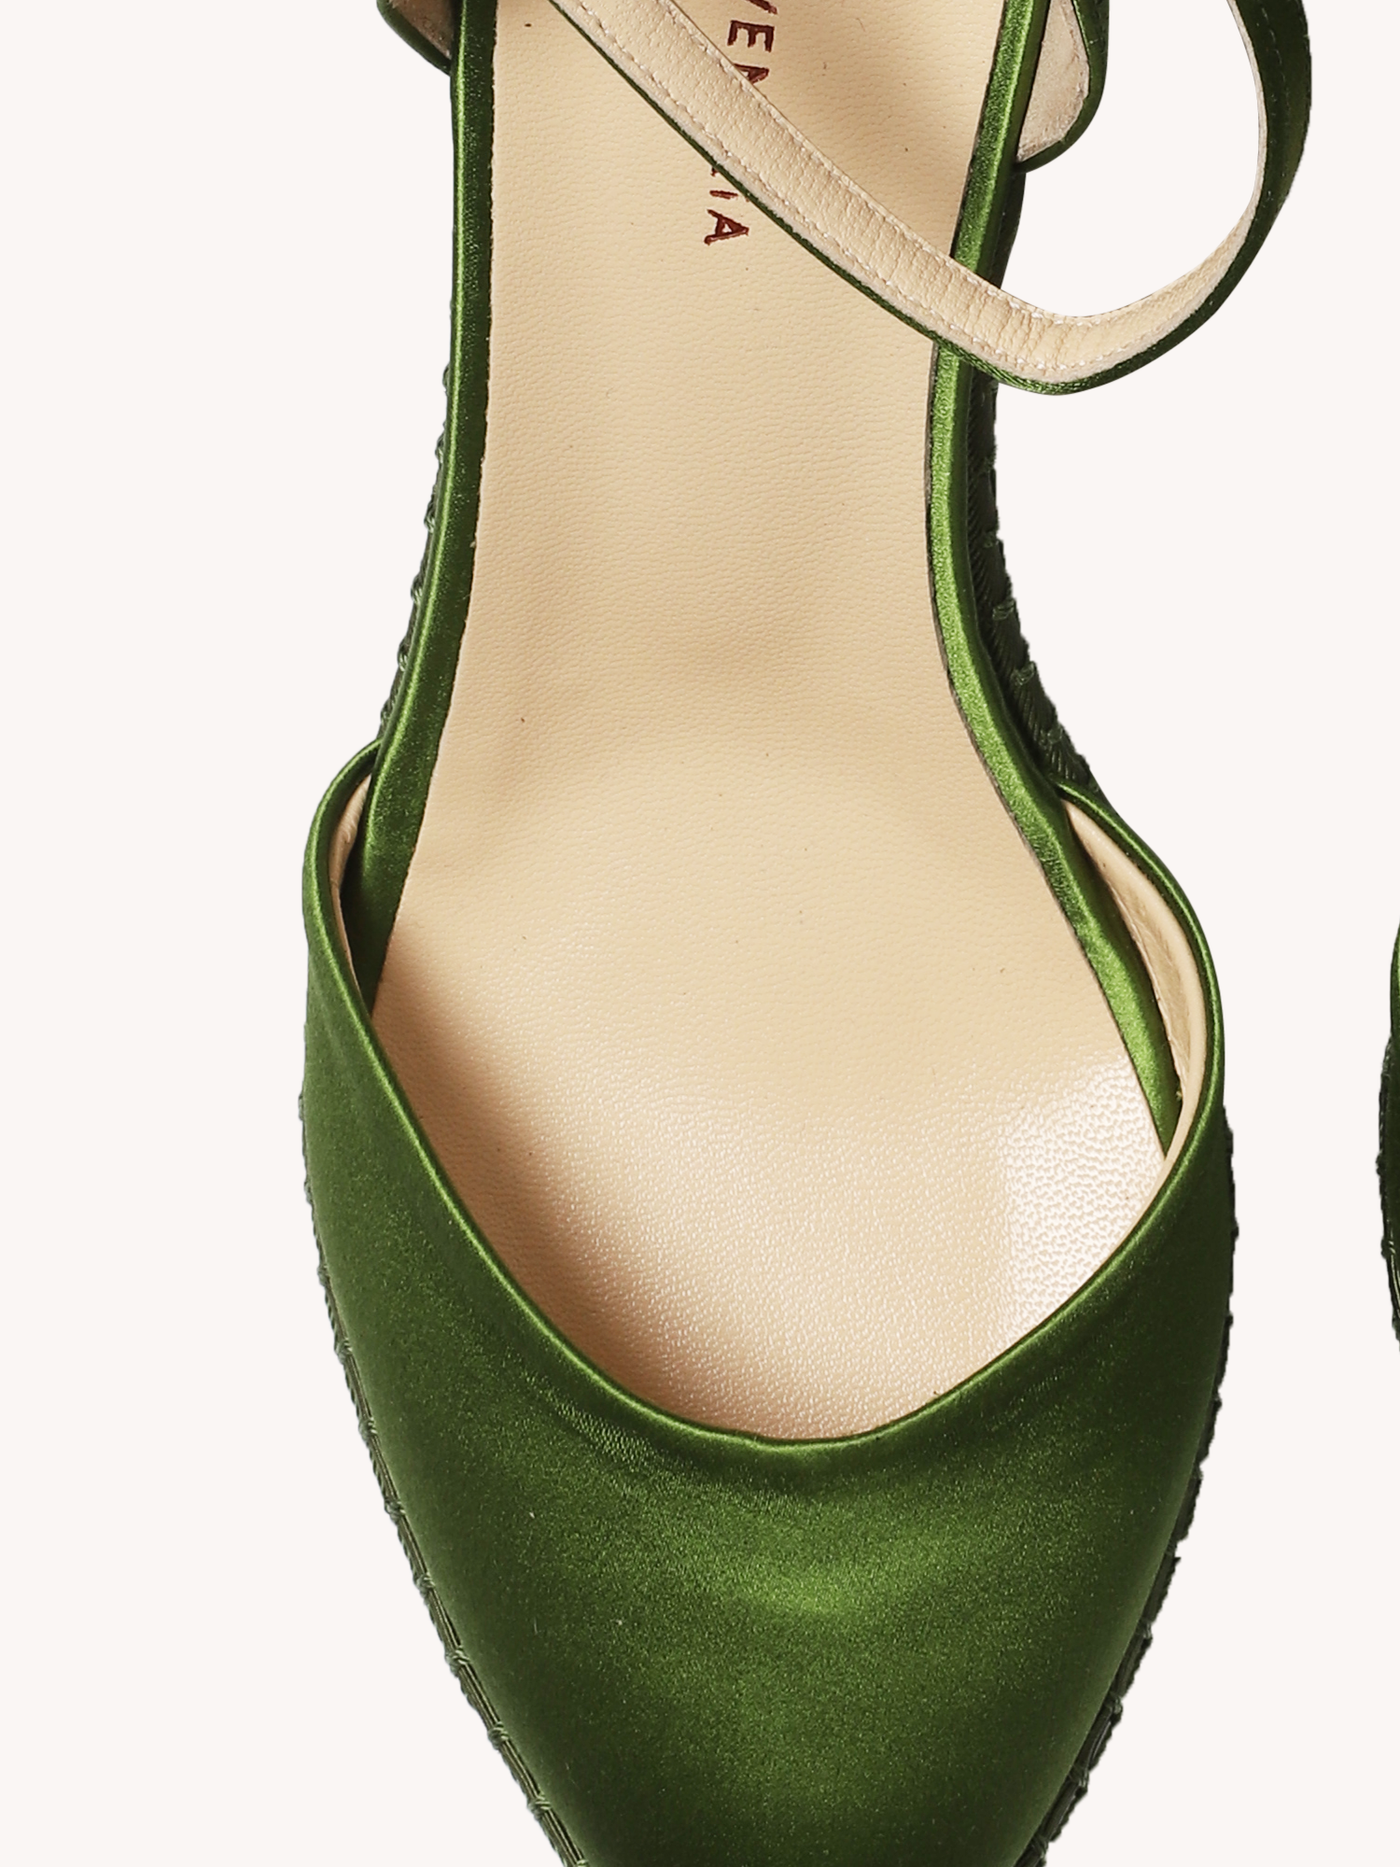 Ankle Strap Wedge in Matcha